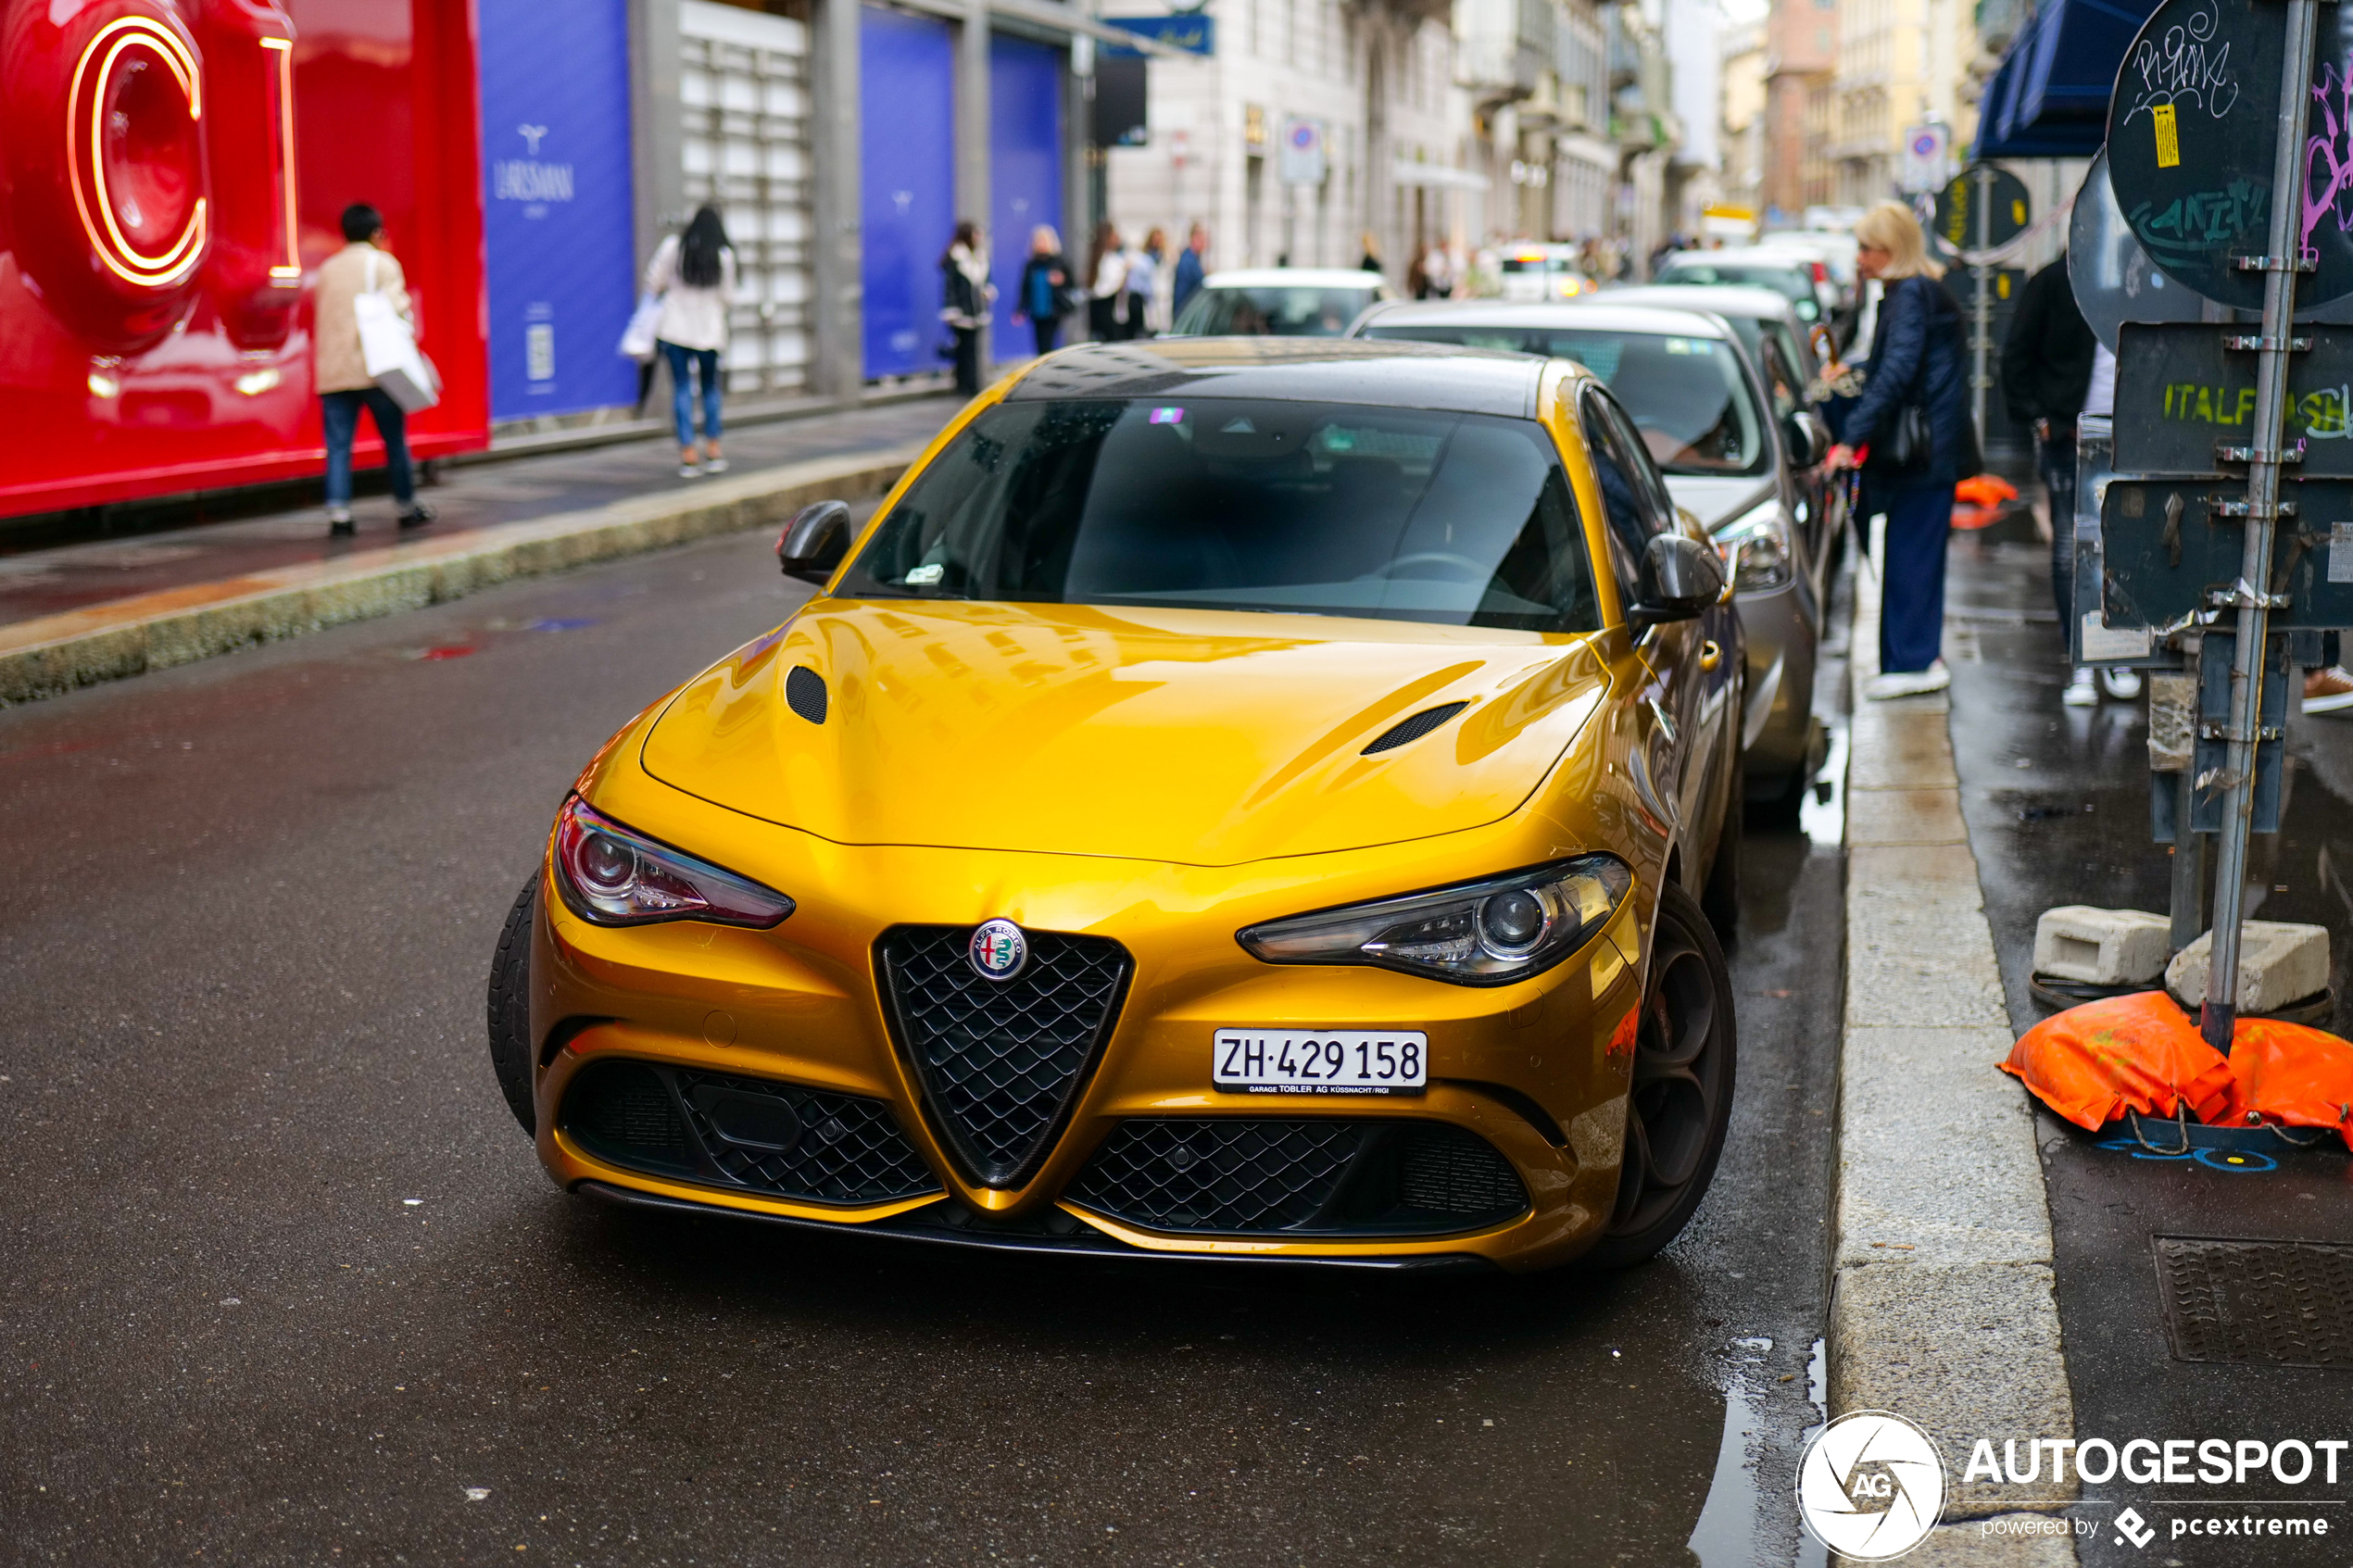 This Alfa Romeo shows what color can do